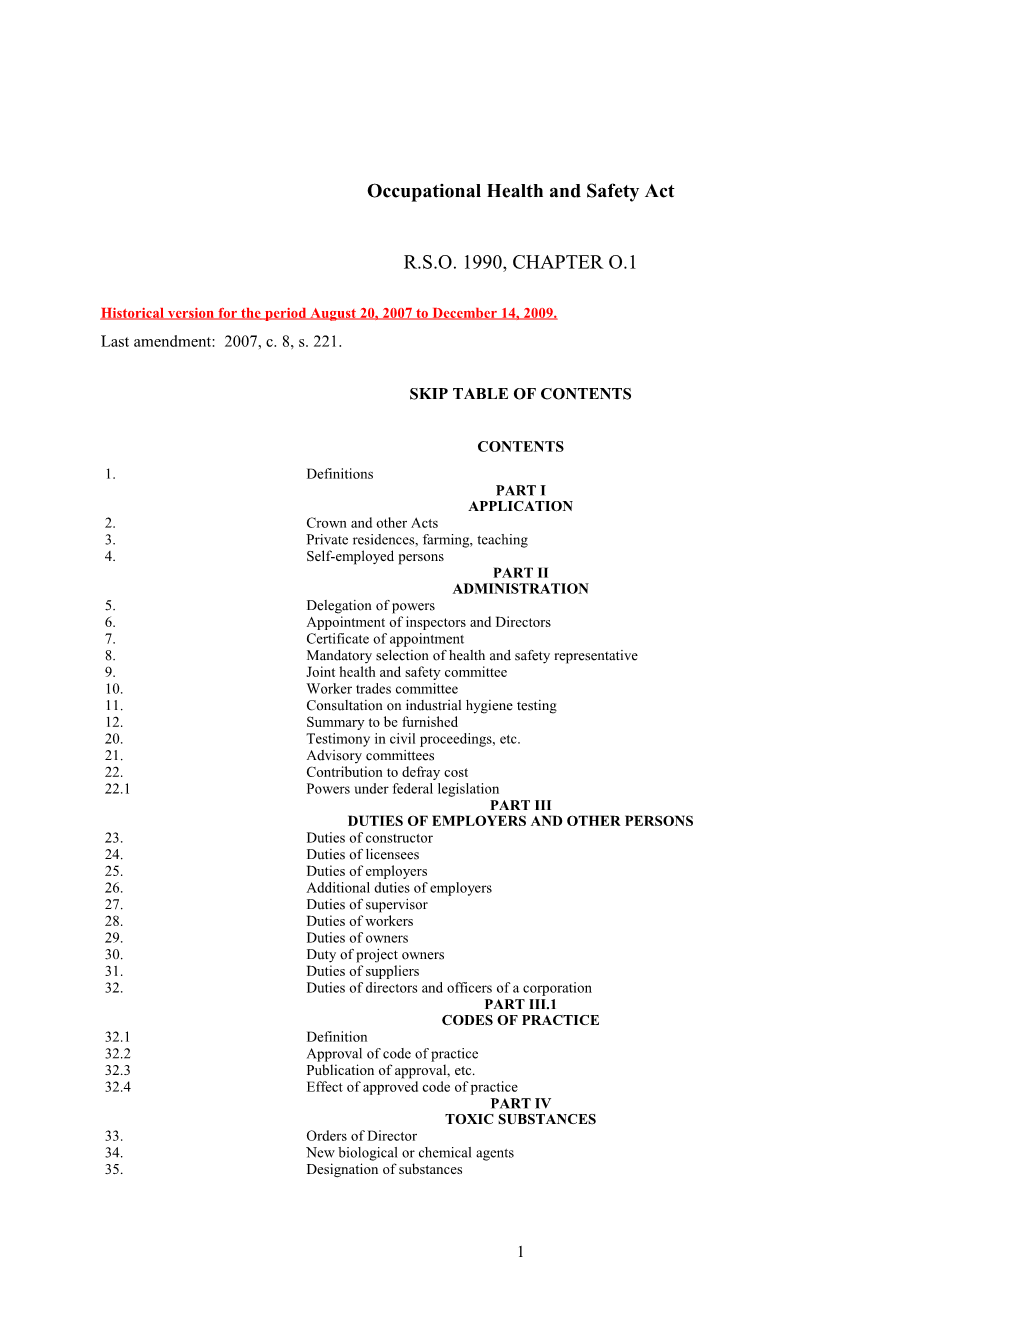 Occupational Health and Safety Act, R.S.O. 1990, C. O.1